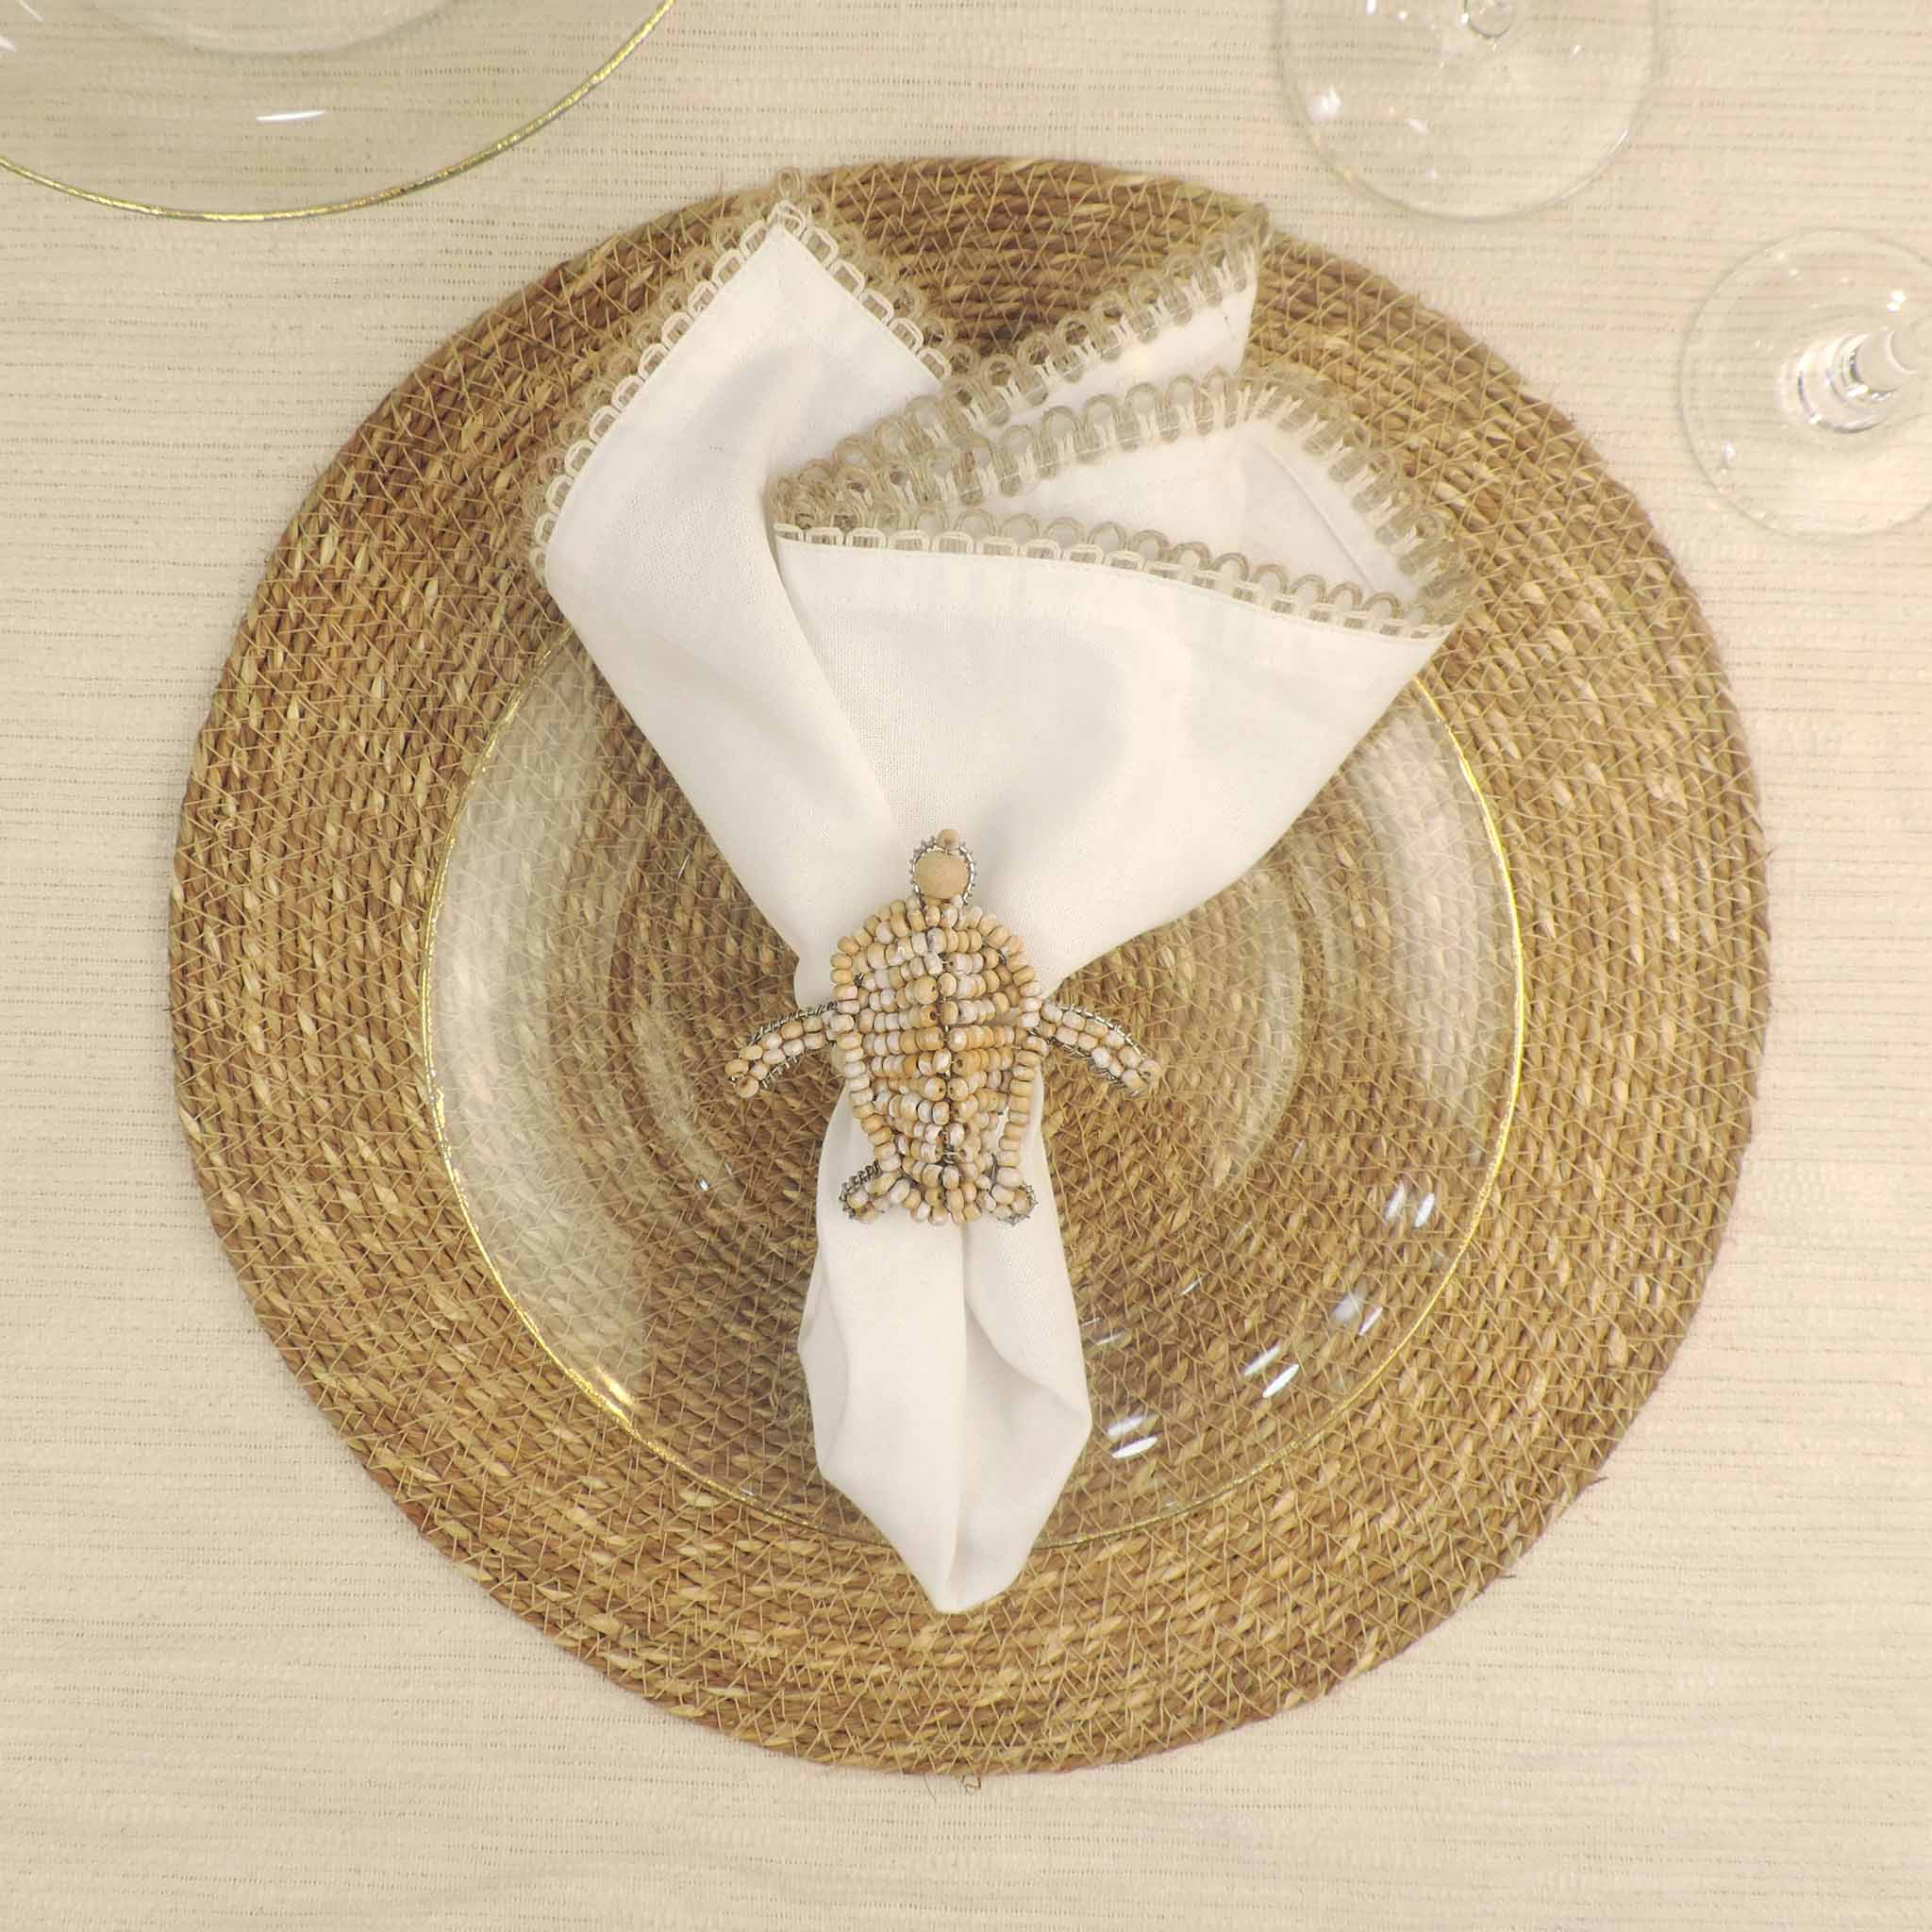 Braided Jute Round Placemat in Natural, Set of 2/4